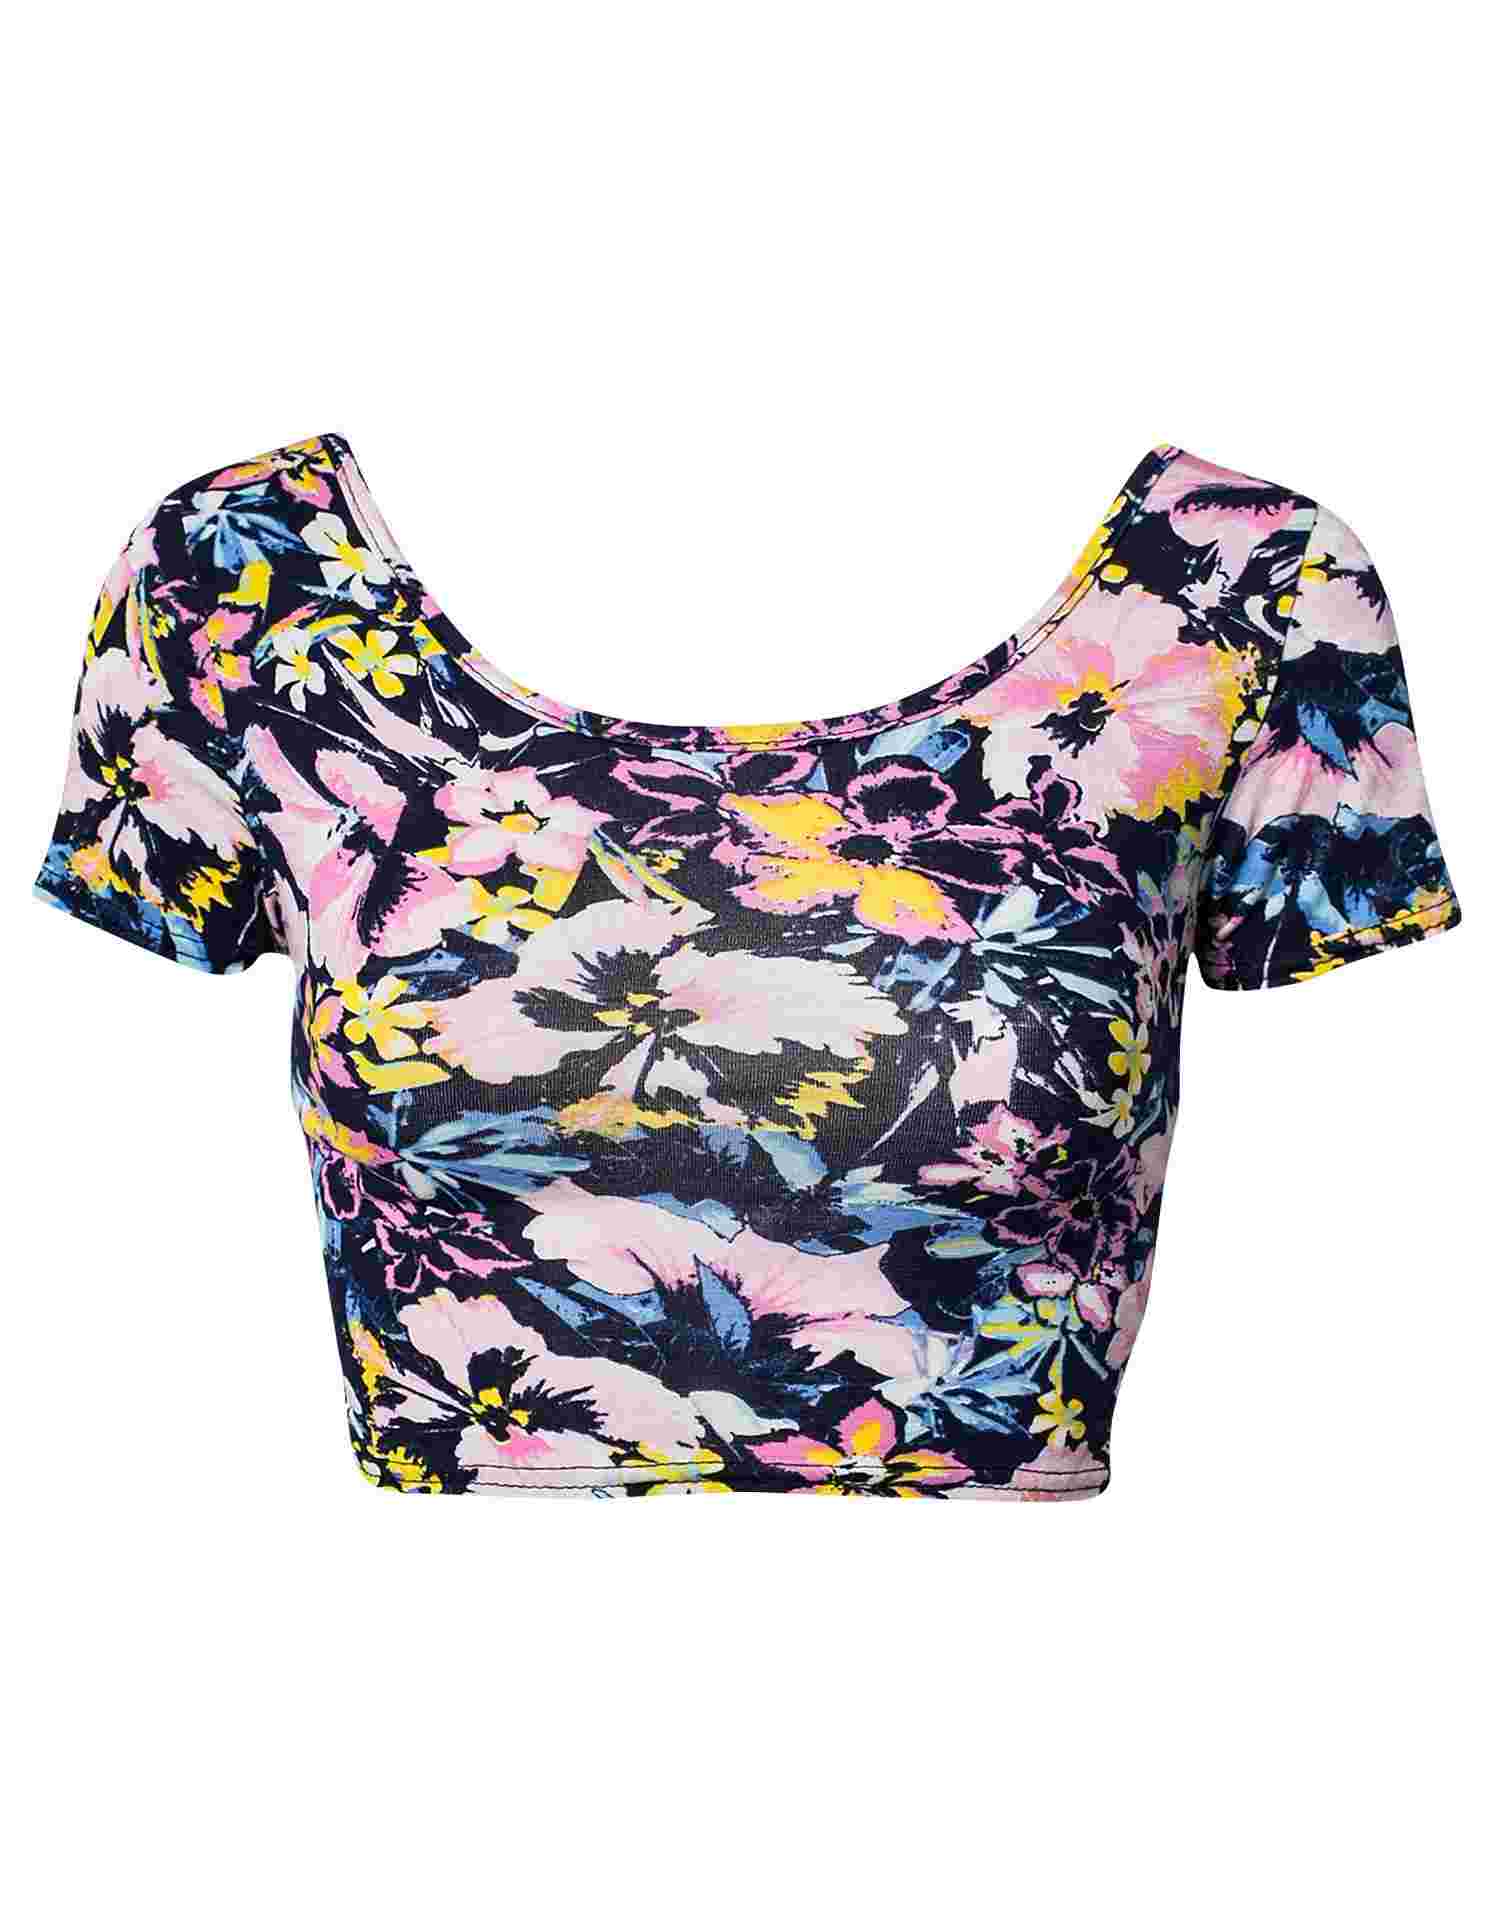 Cross Over Crop Top - Club L - Print - Tops - Clothing - Women - Nelly.com